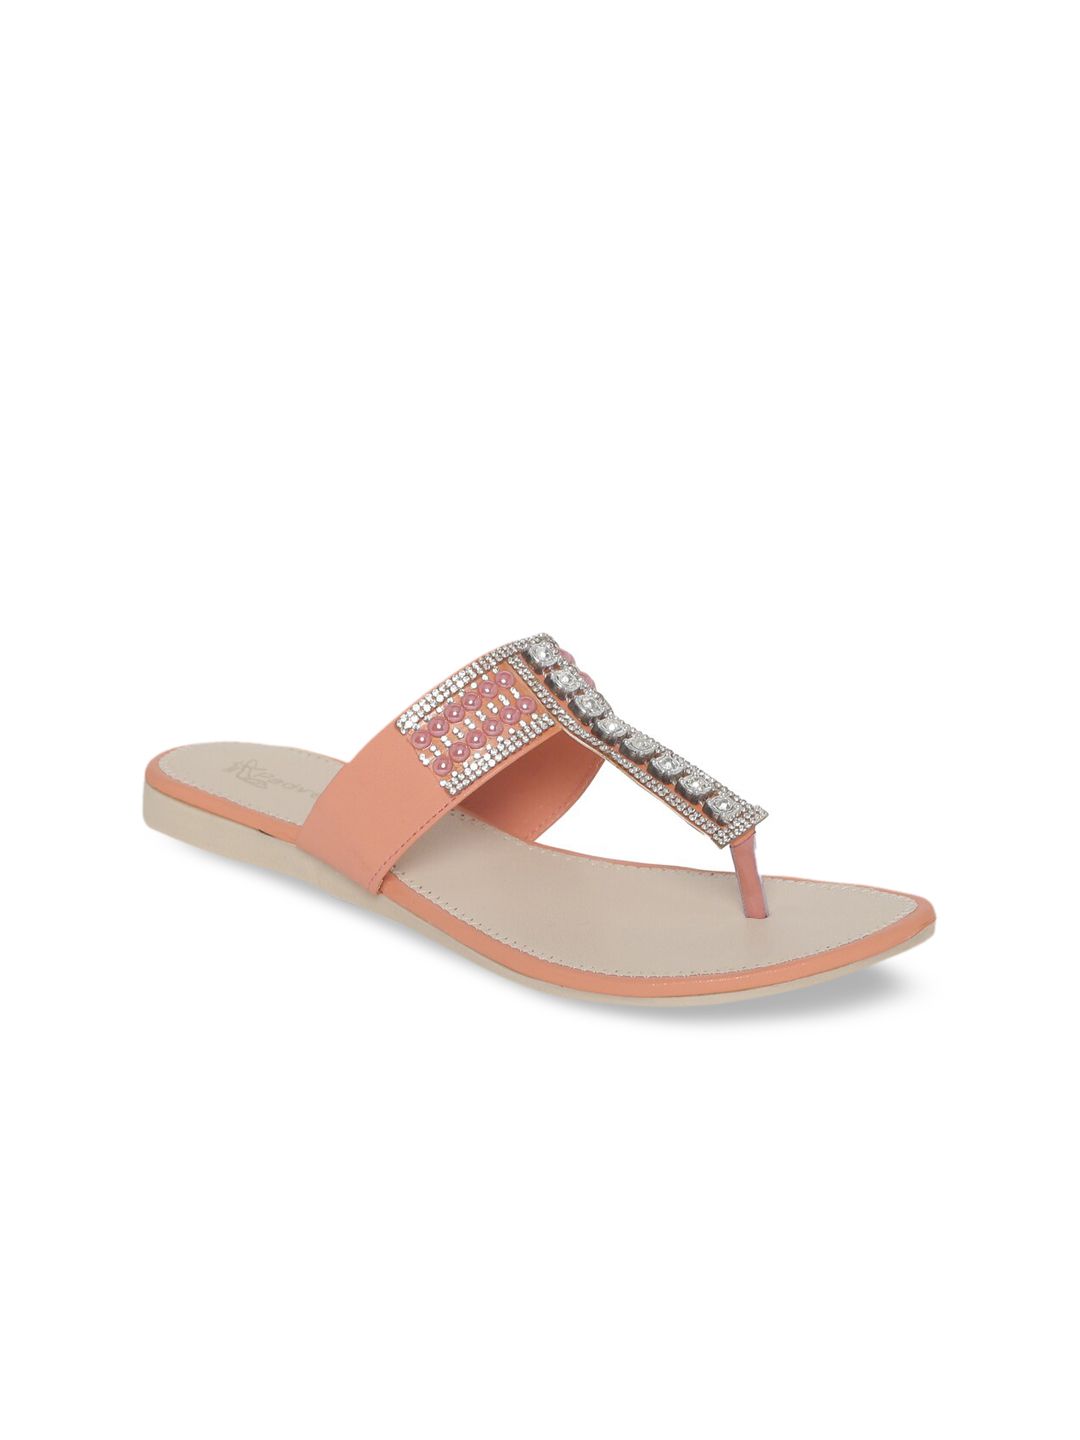 Padvesh Women Peach-Coloured Embellished T-Strap Flats Price in India